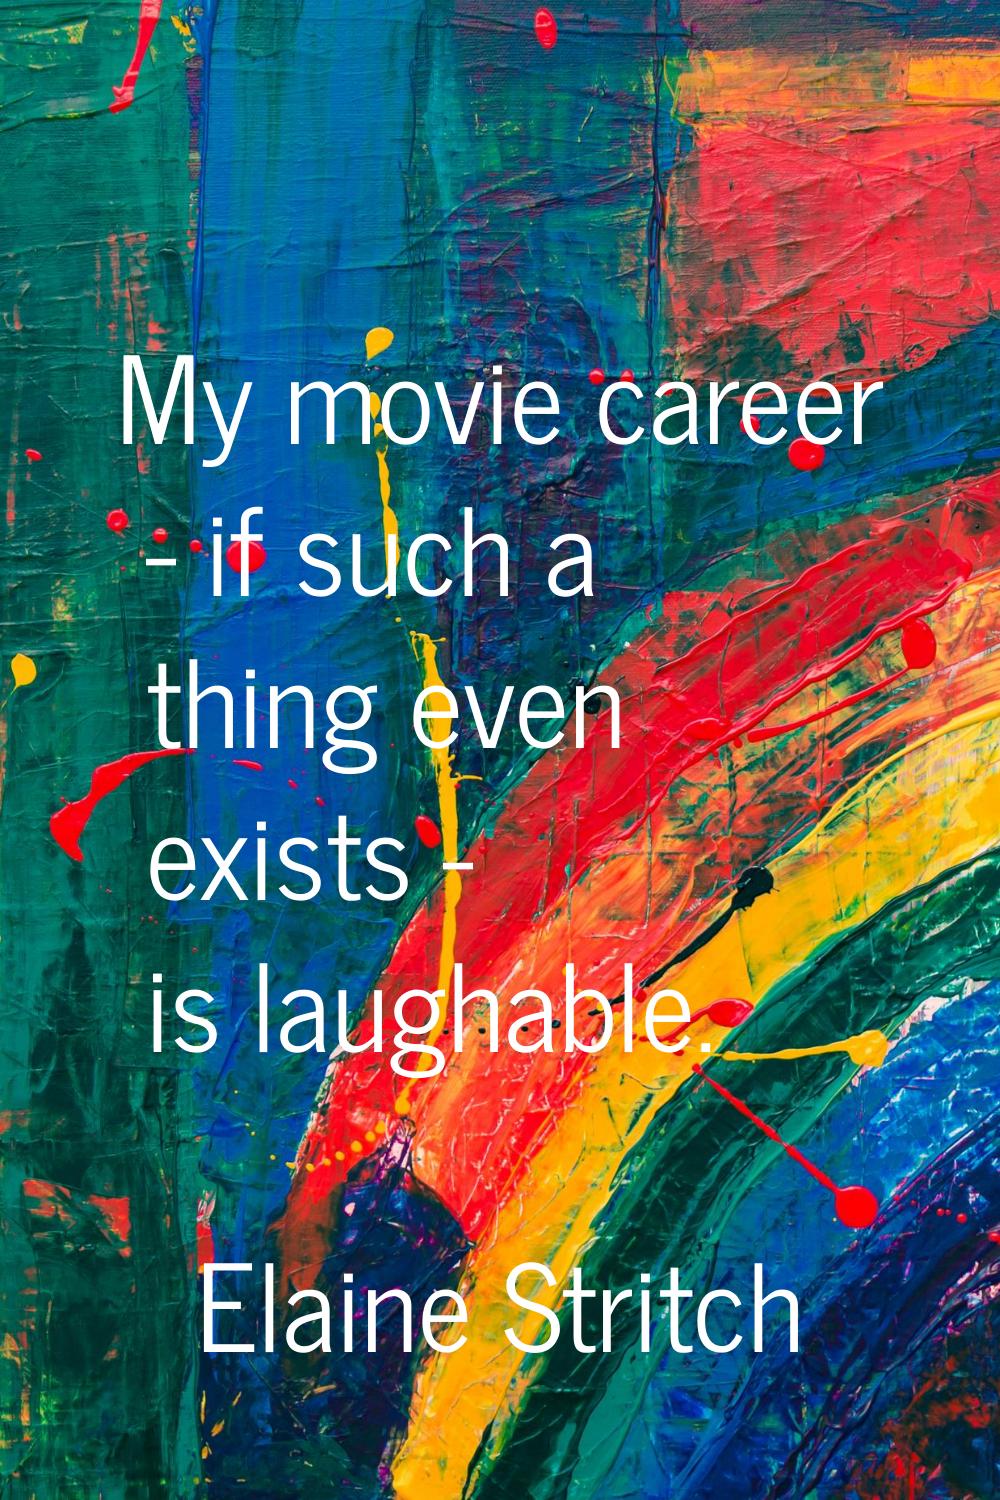 My movie career - if such a thing even exists - is laughable.